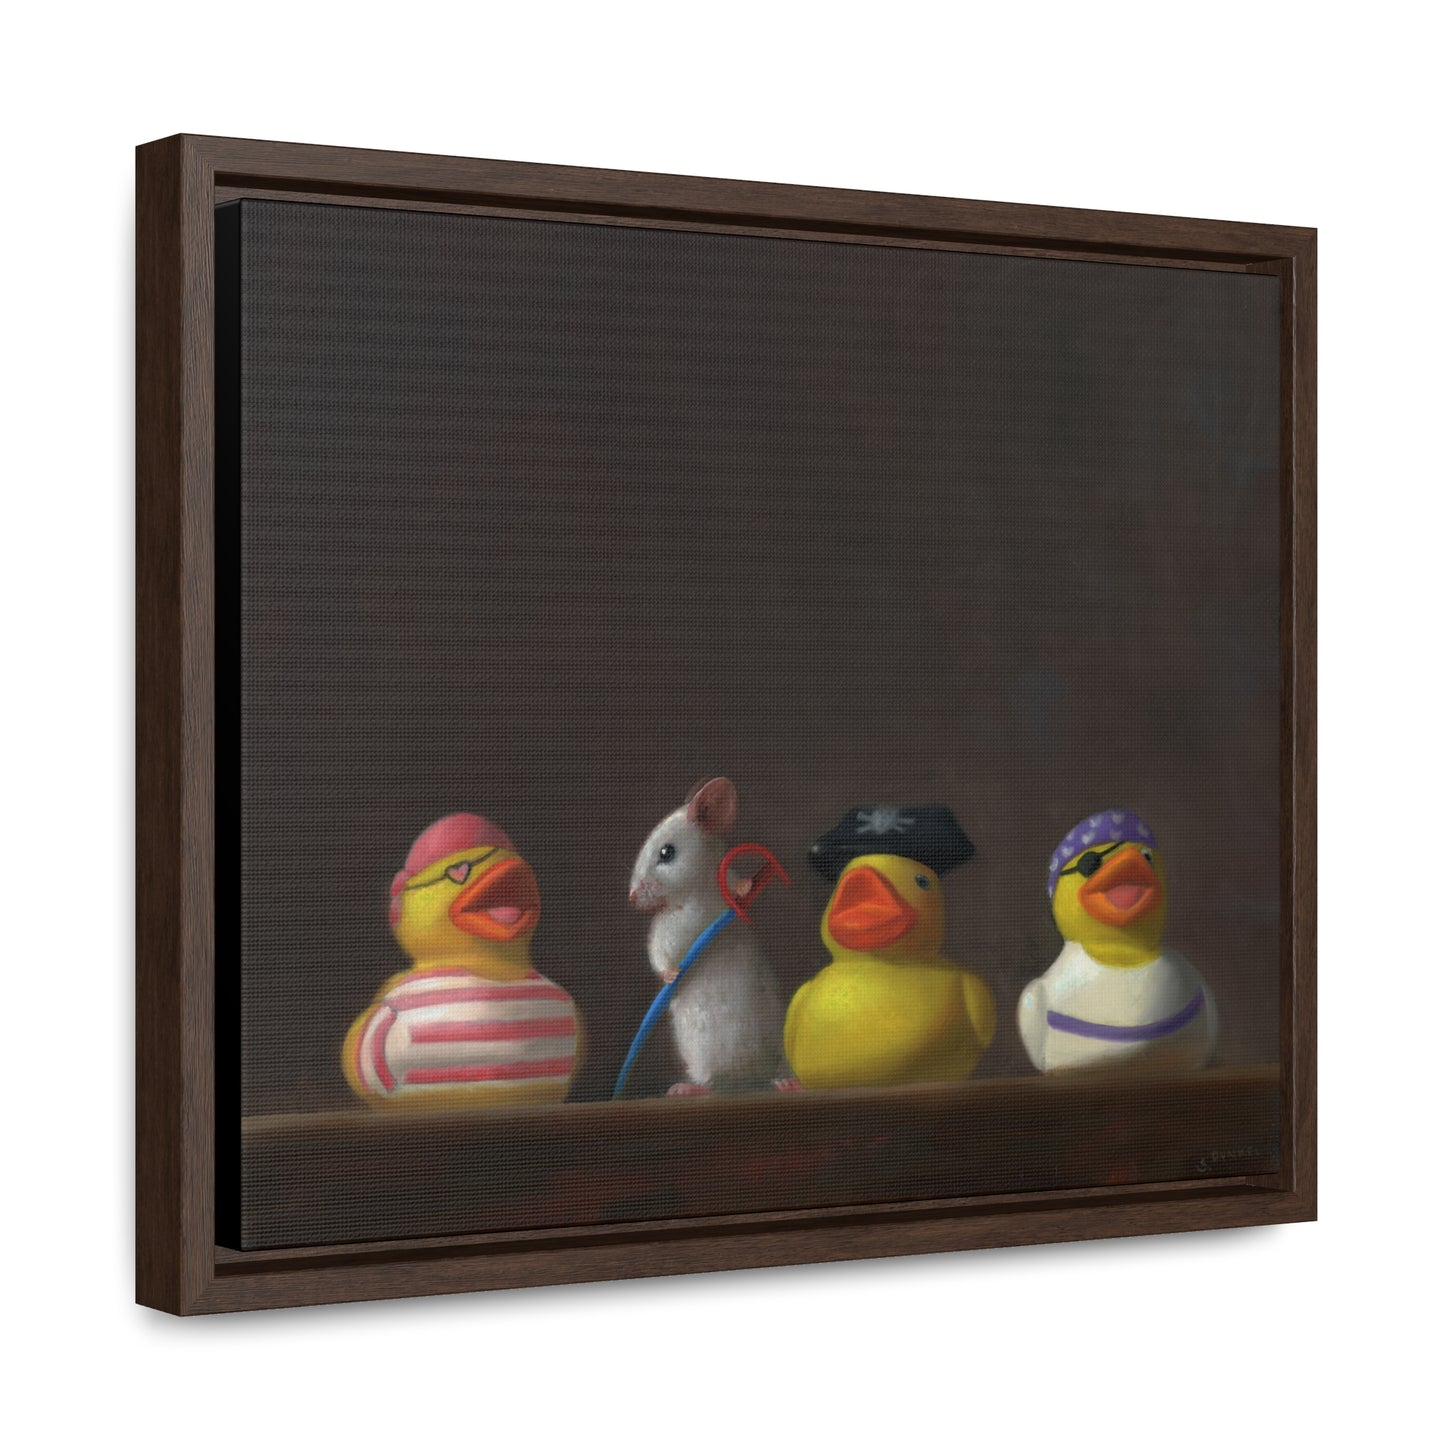 Gallery Framed Canvas - Stuart Dunkel: "Family Portrait: It's a Pirates Life" - Framed Canvas Reproduction